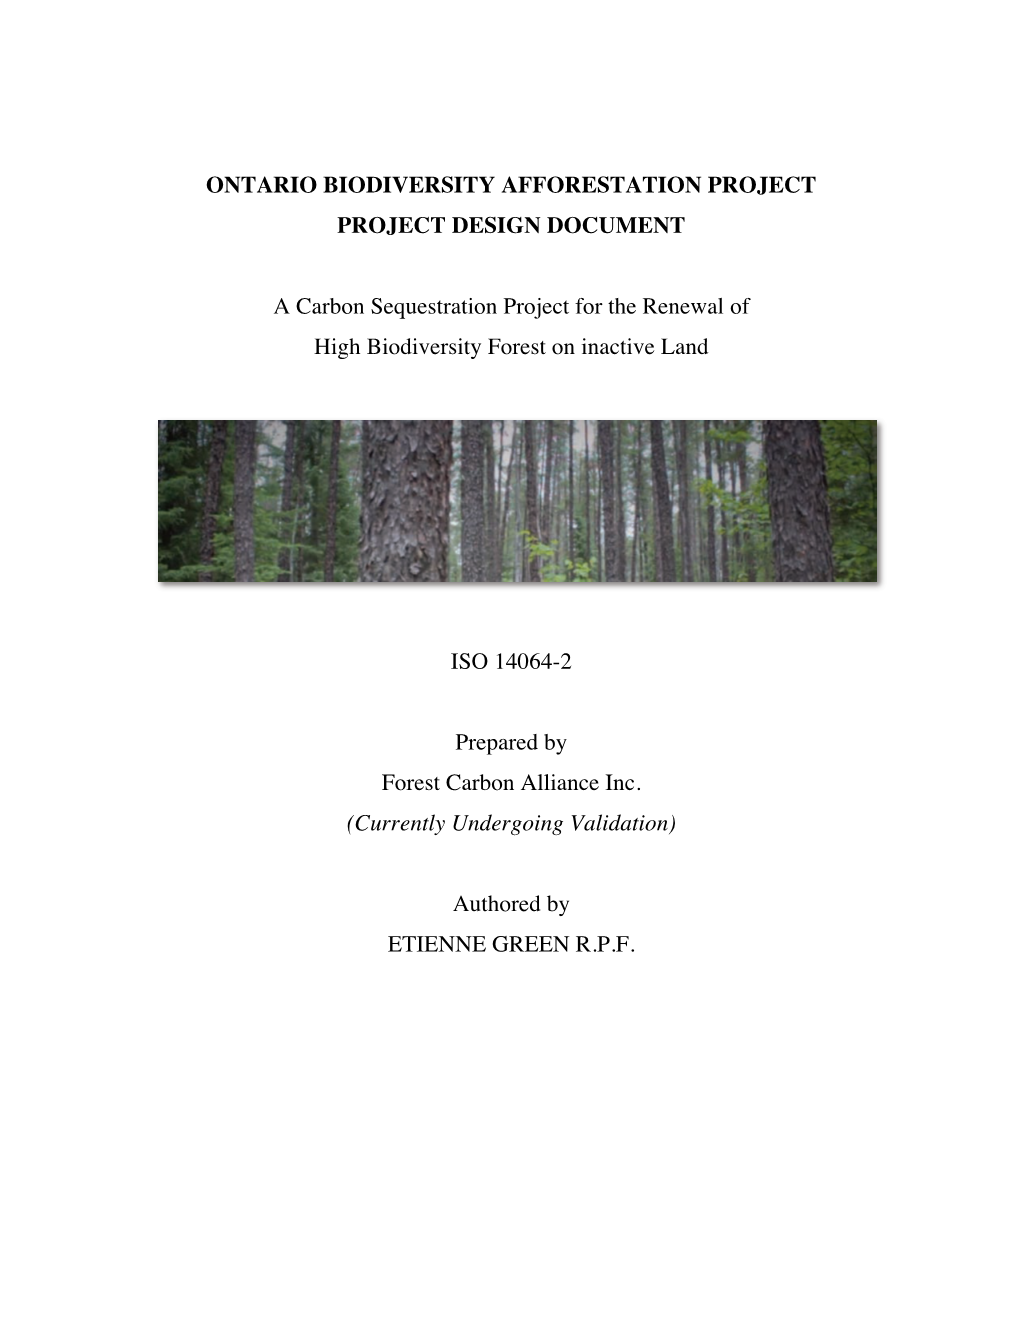 Download and Public Review at 11.3 Report Format Reports Will Be Kept Electronically at the Project Proponents Englehart Office